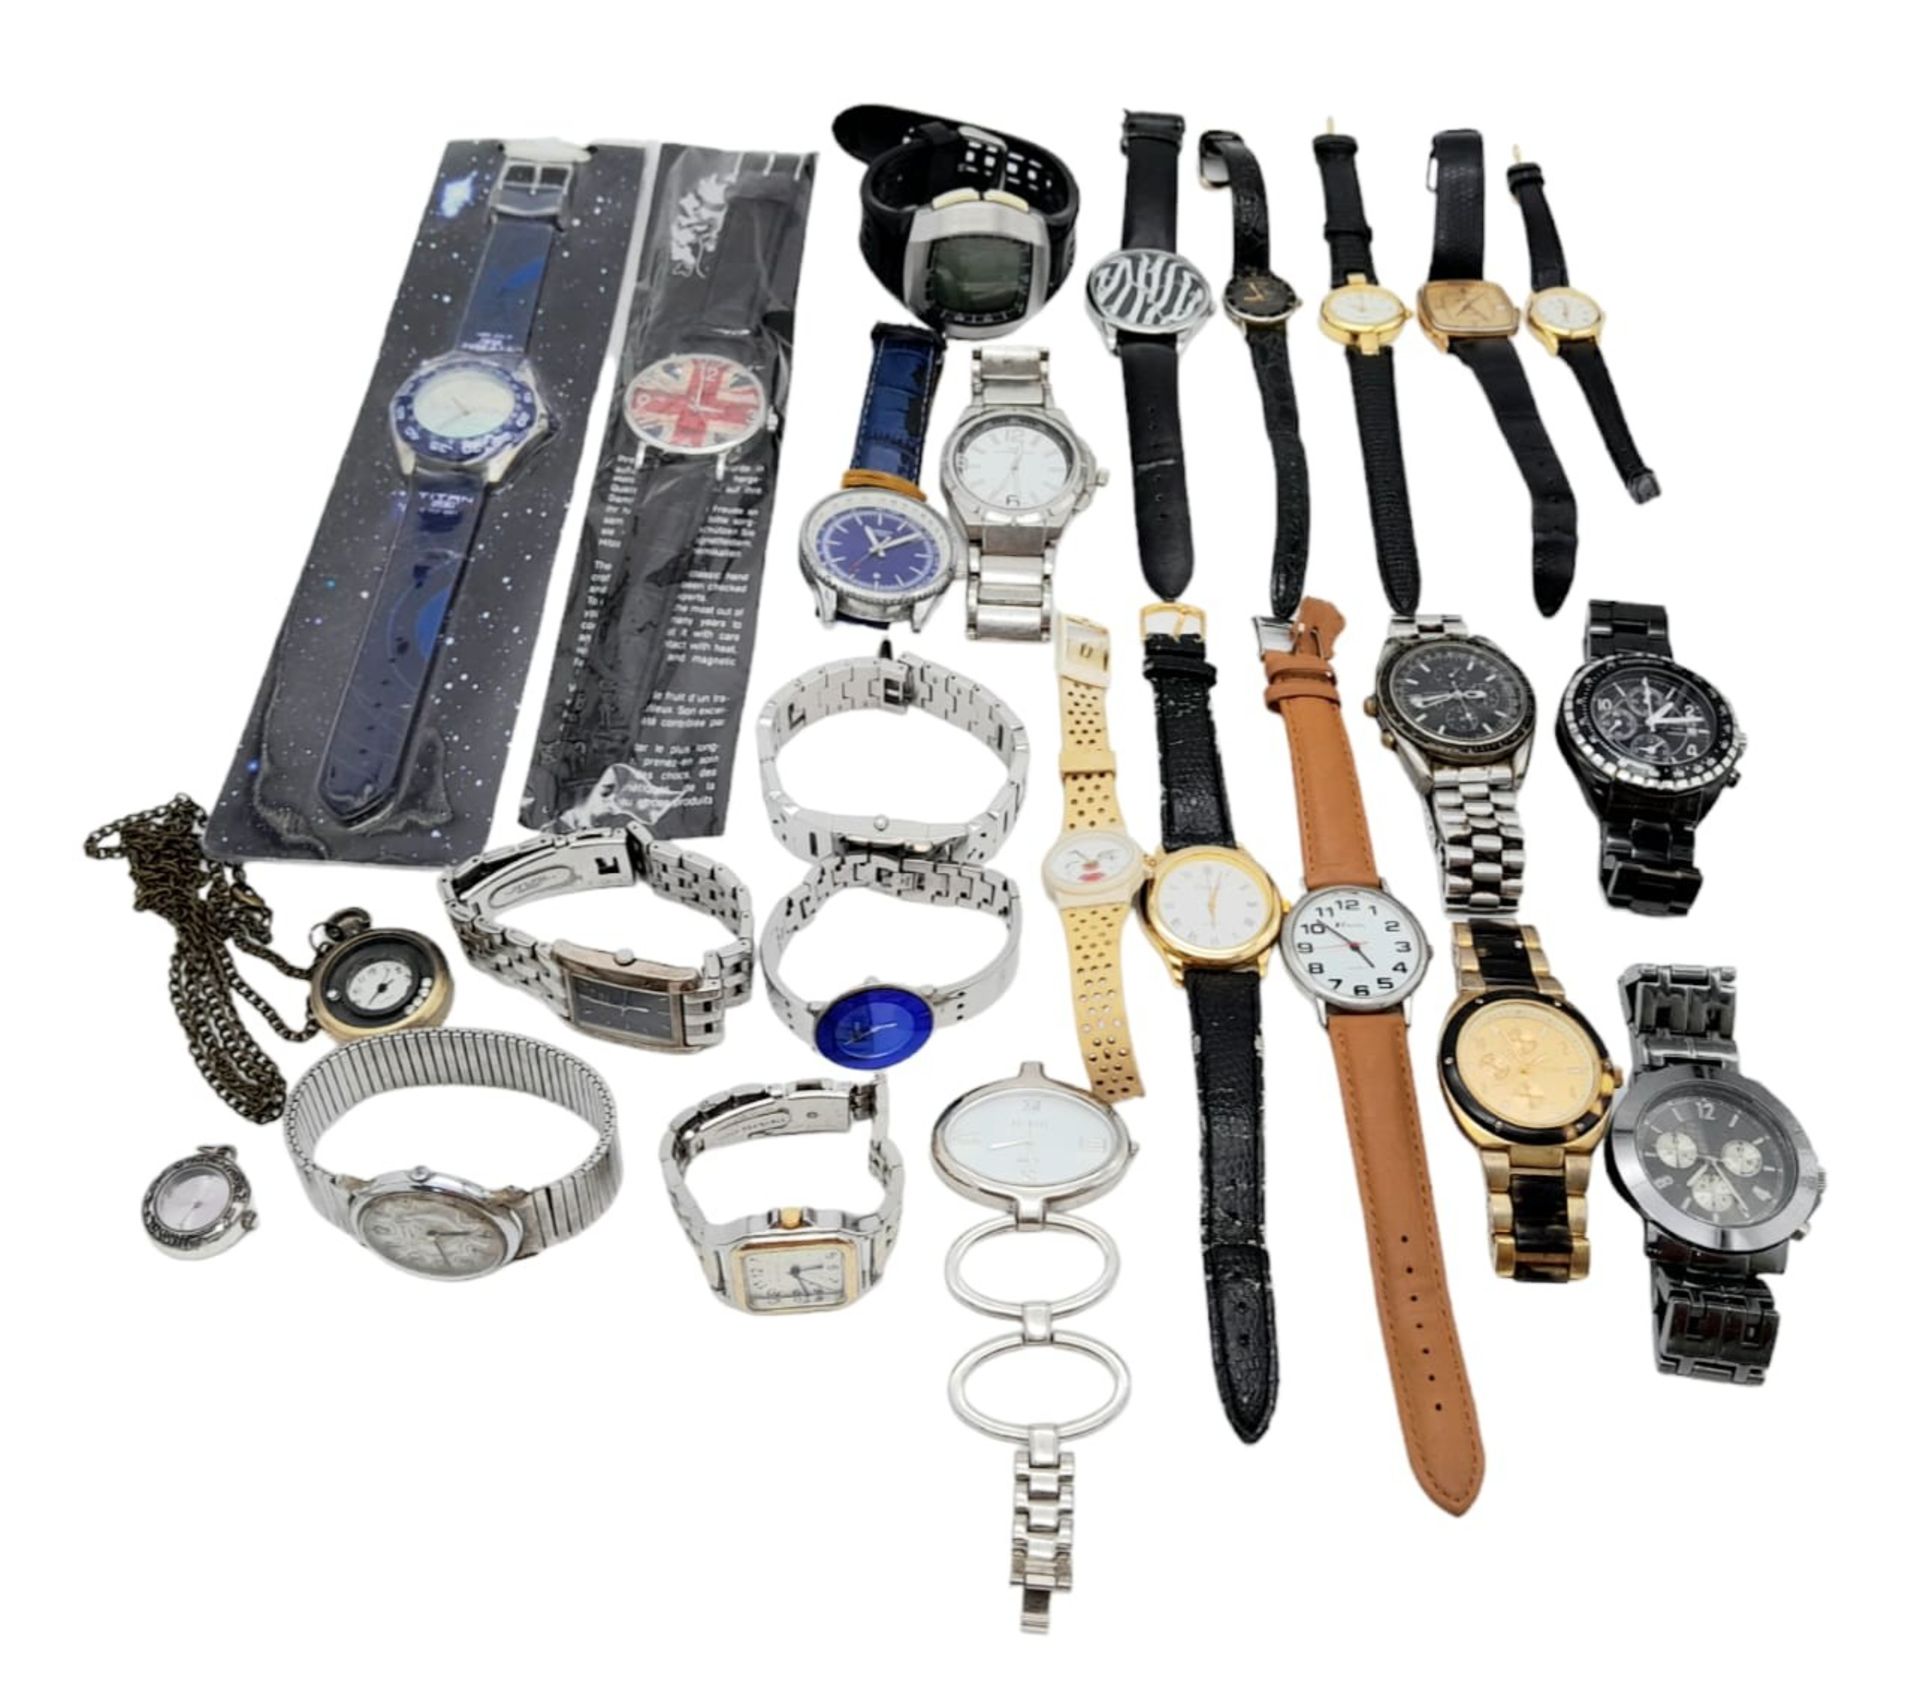 A real treasure , a large group of watches, including names such as Citizen, Carvel, D&G, Omega,